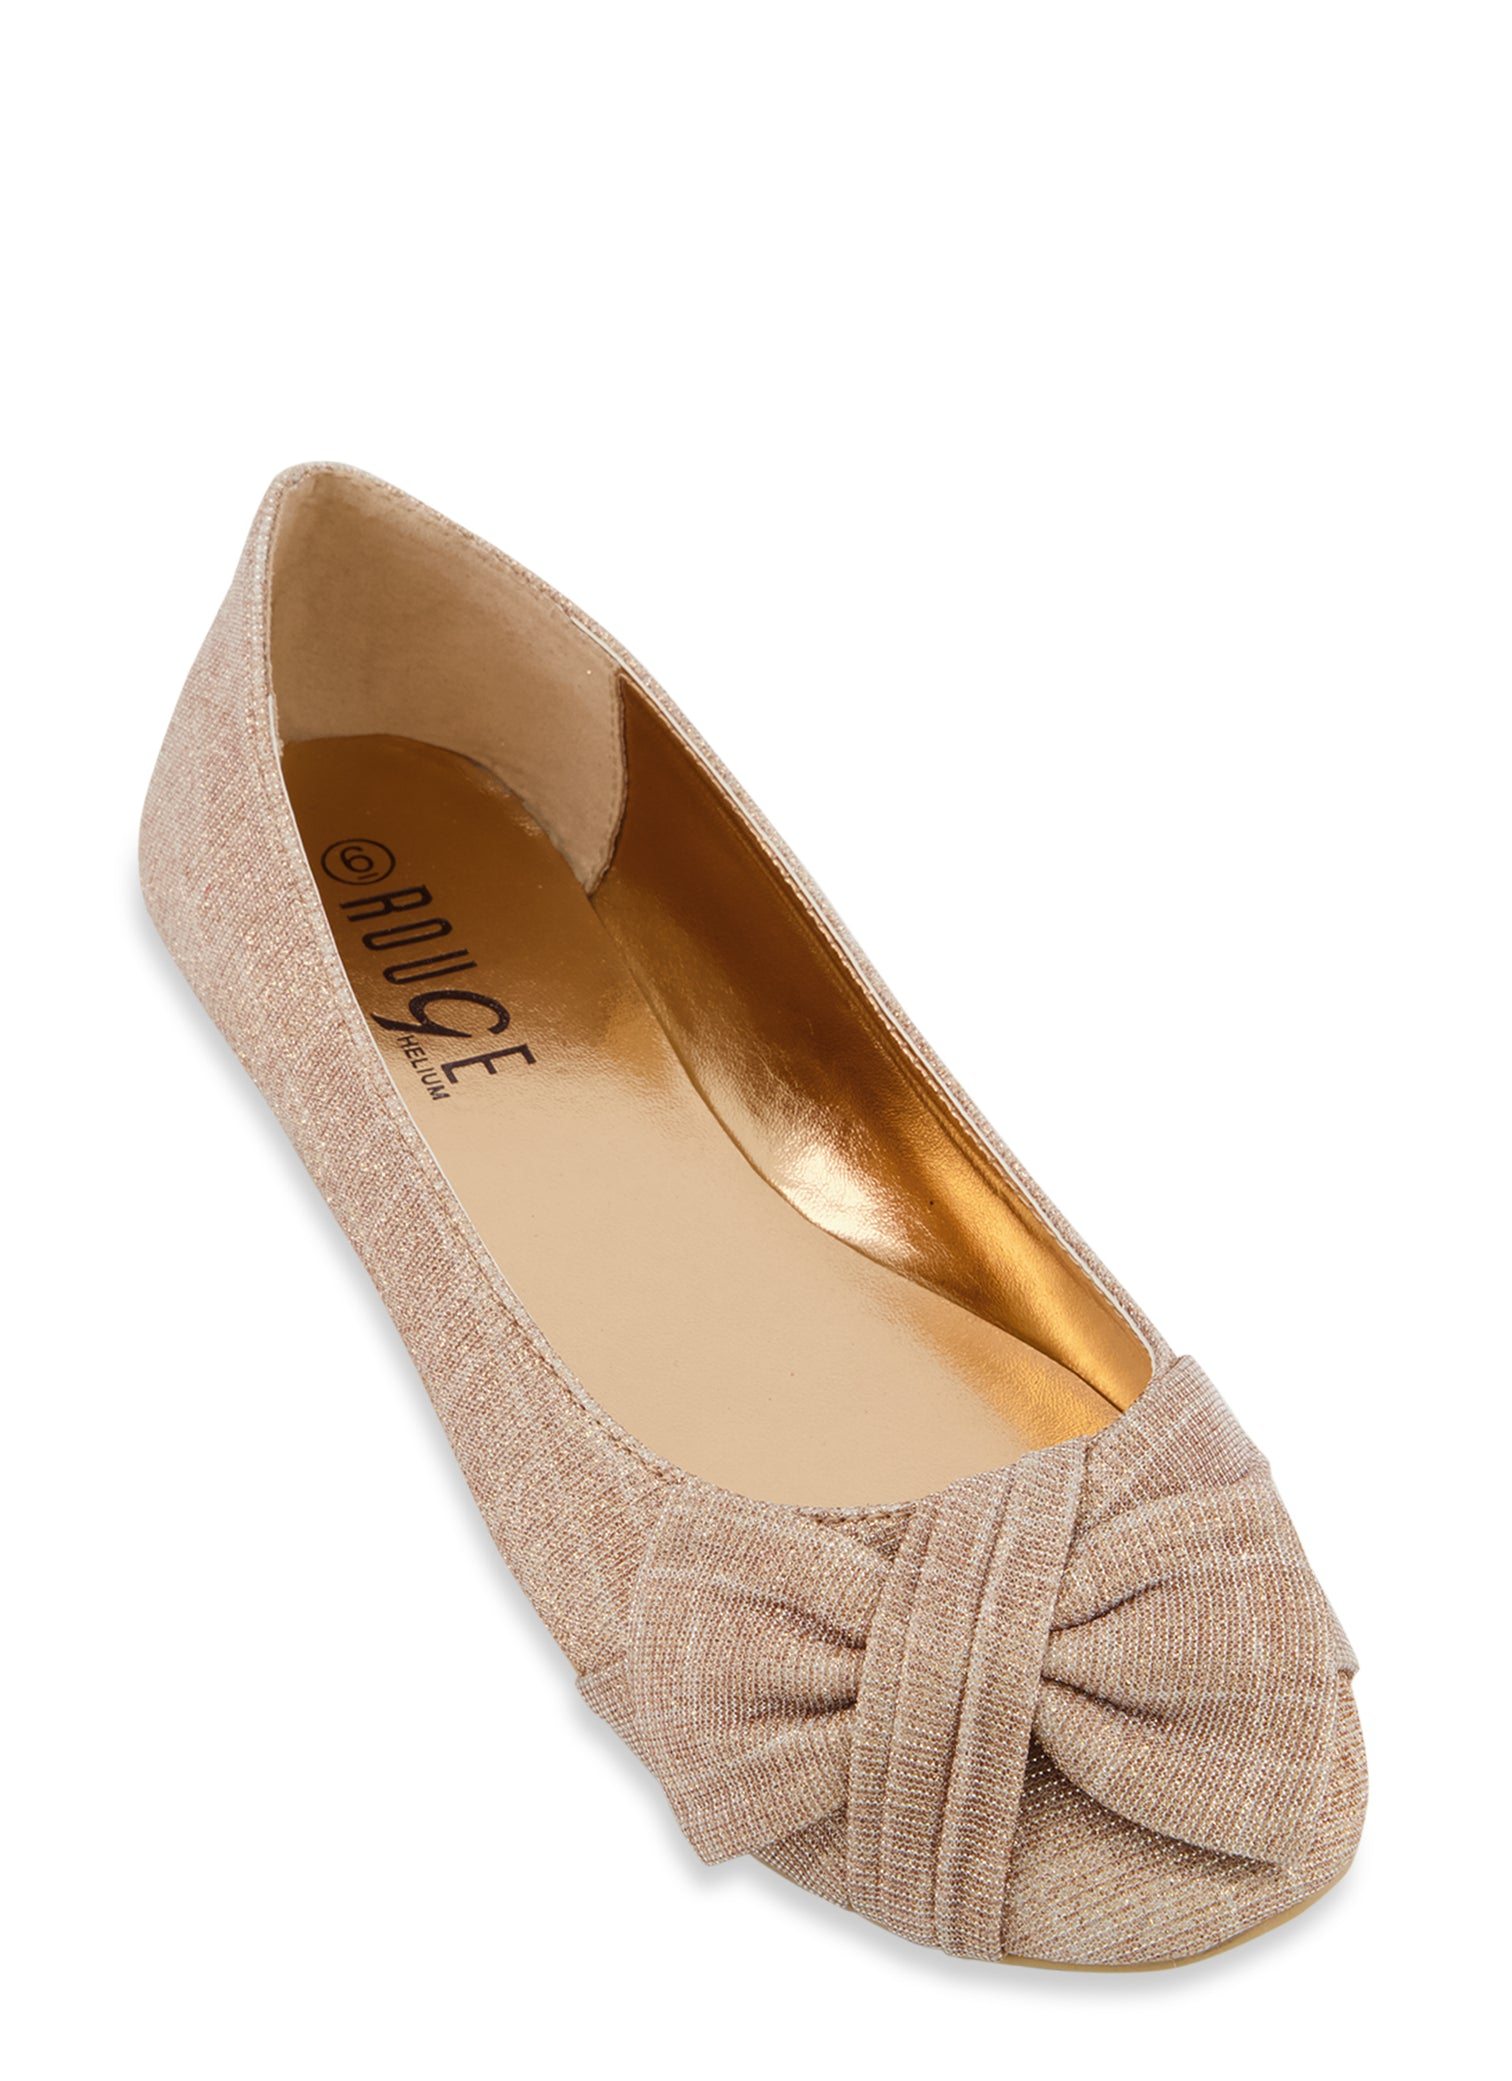 Bow Detail Round Toe Flats